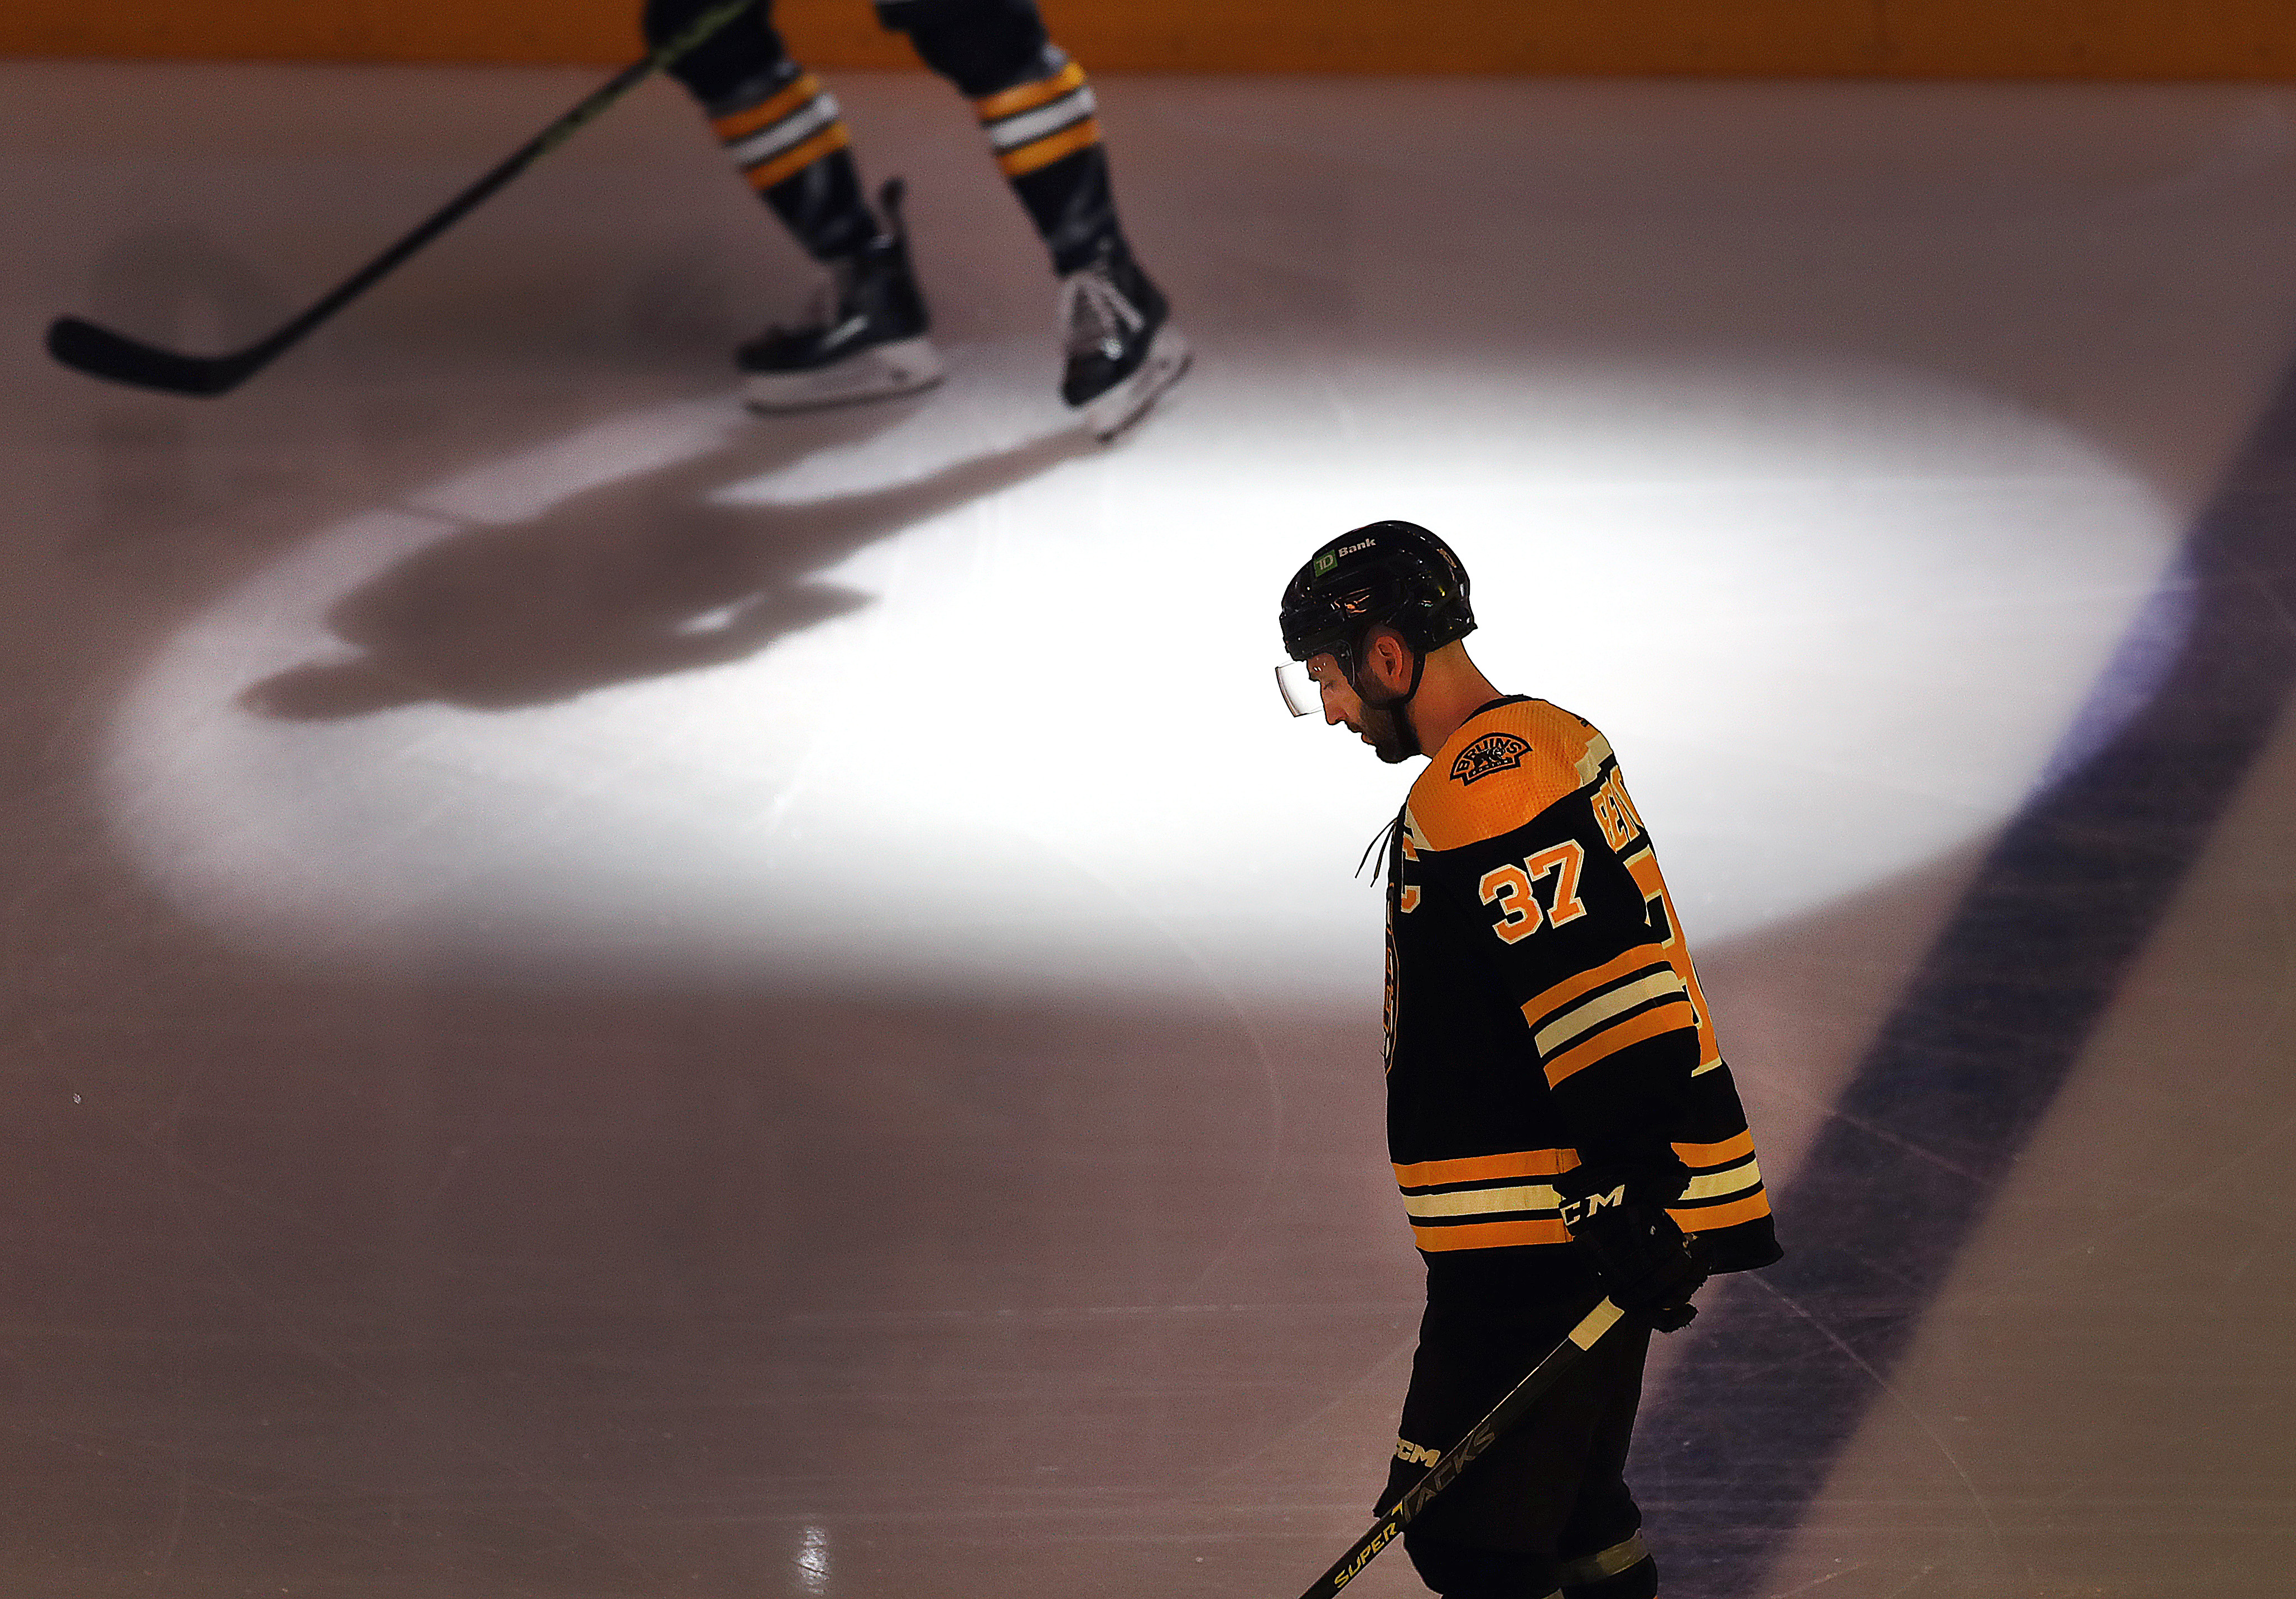 After being honored, Patrice Bergeron delivered - The Boston Globe